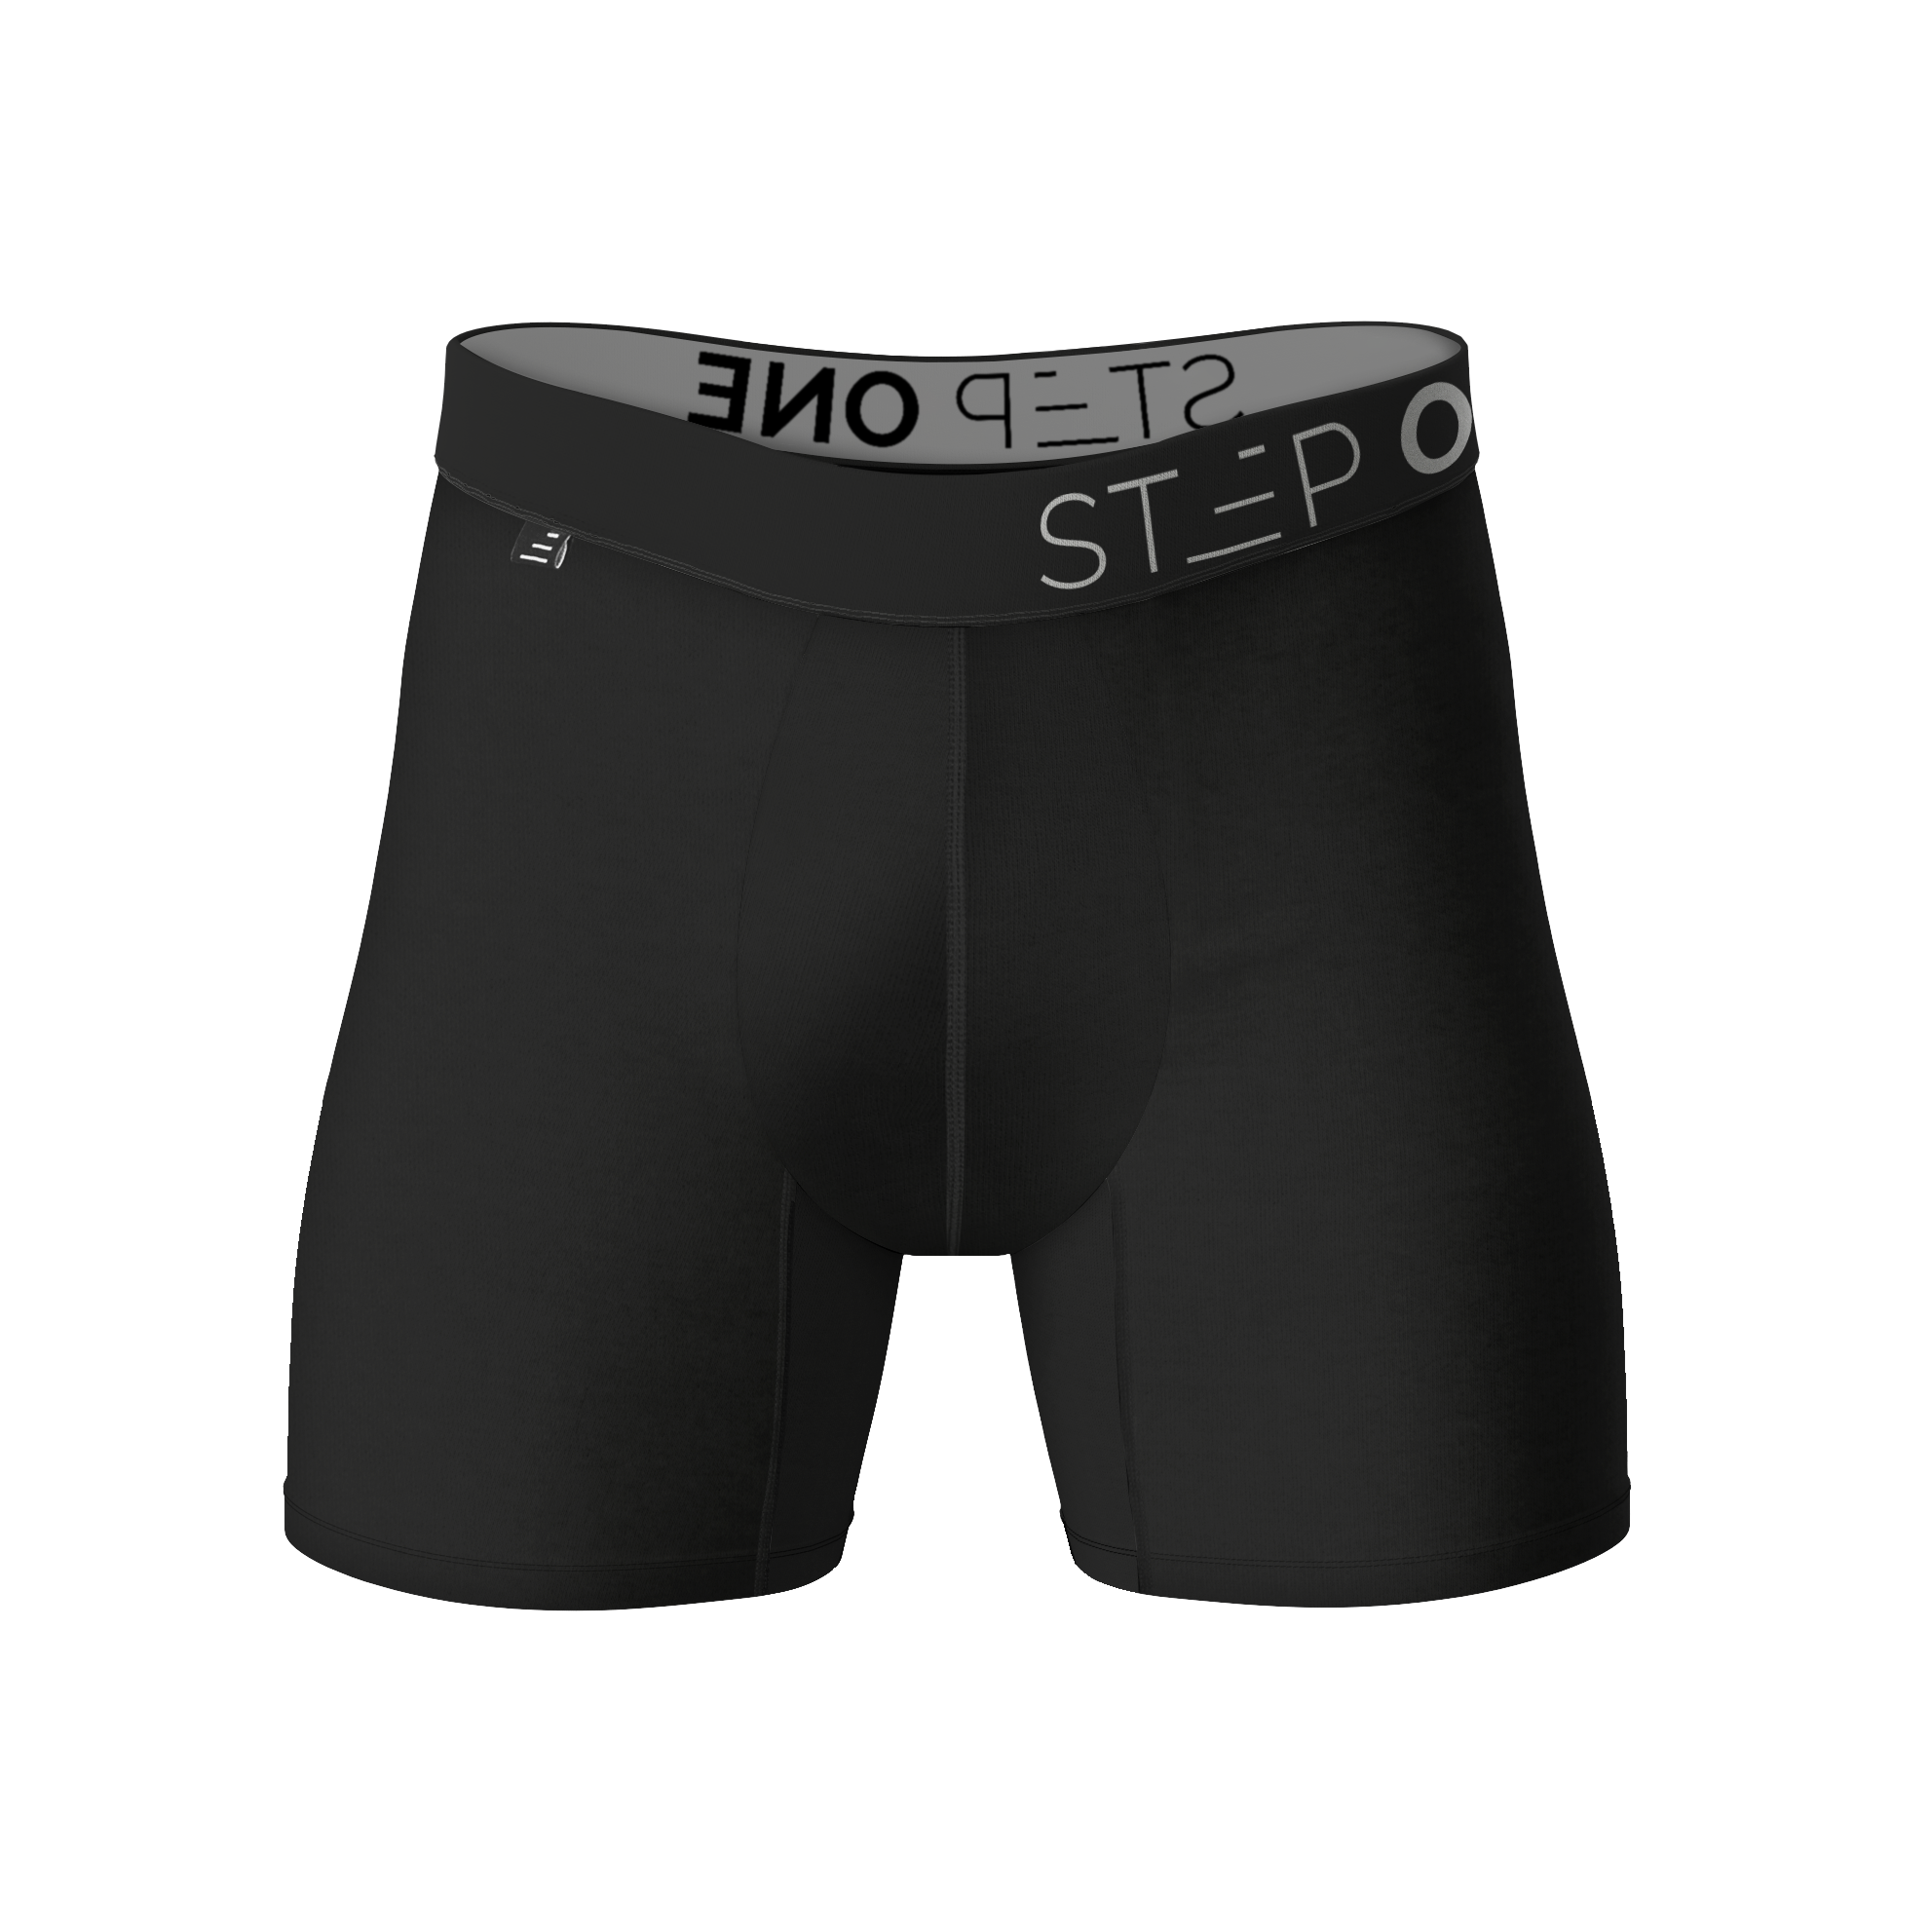 ForPro Men's Boxer Shorts, Disposable Shorts for Massage, Tanning, Waxing  and Medical Services, Individually-Wrapped, One Size Fits Most, Black